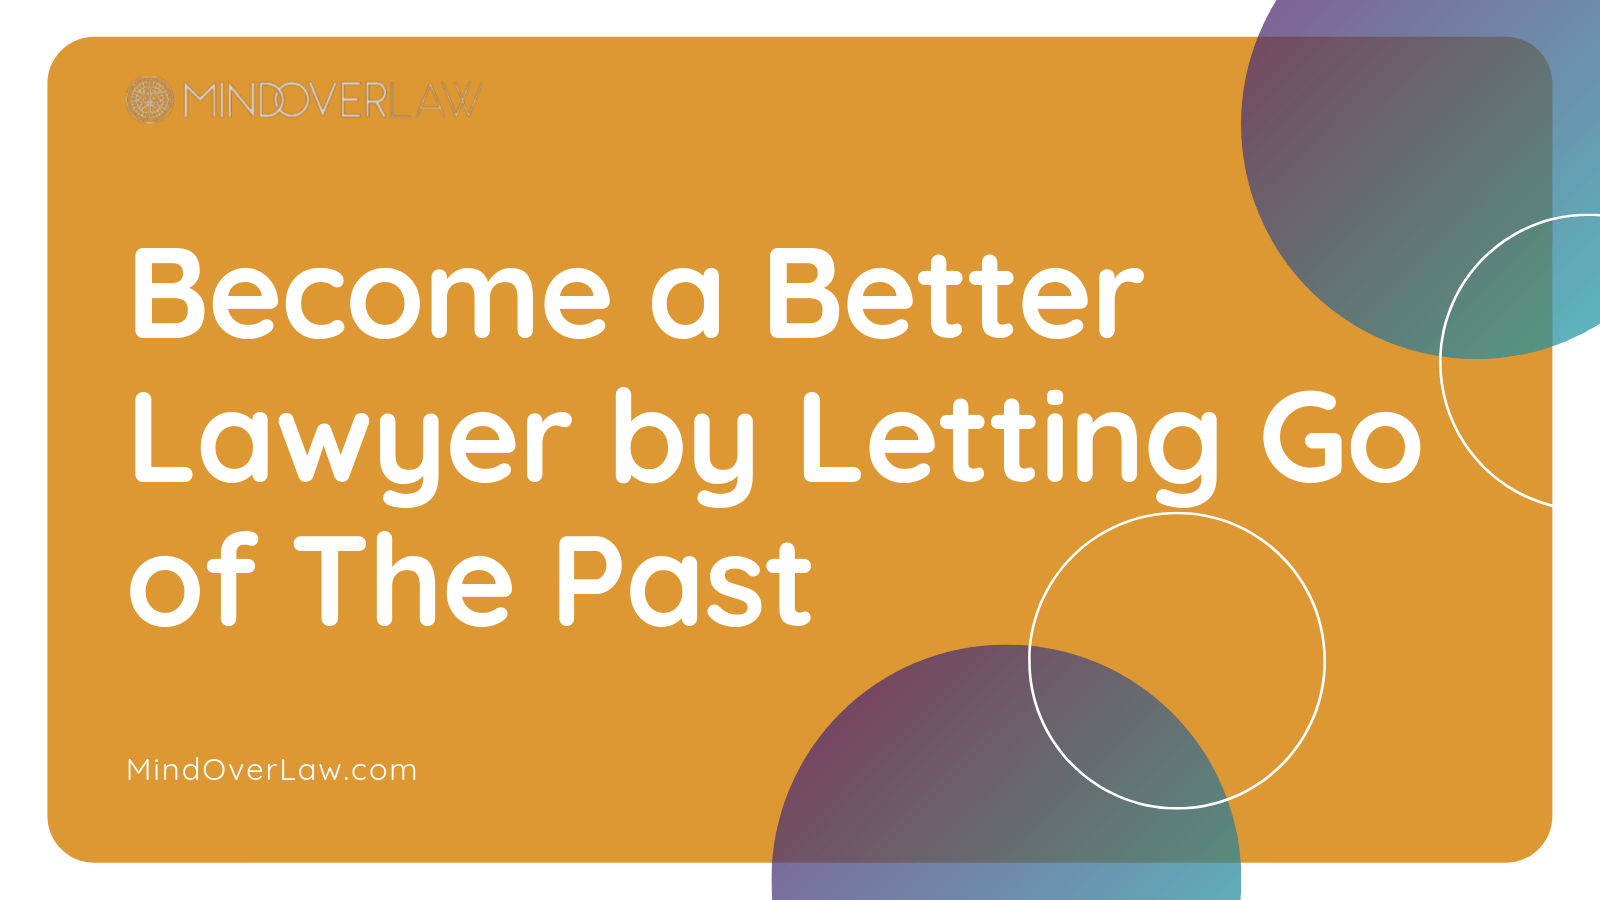 Become a Better Lawyer by Letting Go of The Past - mind over law